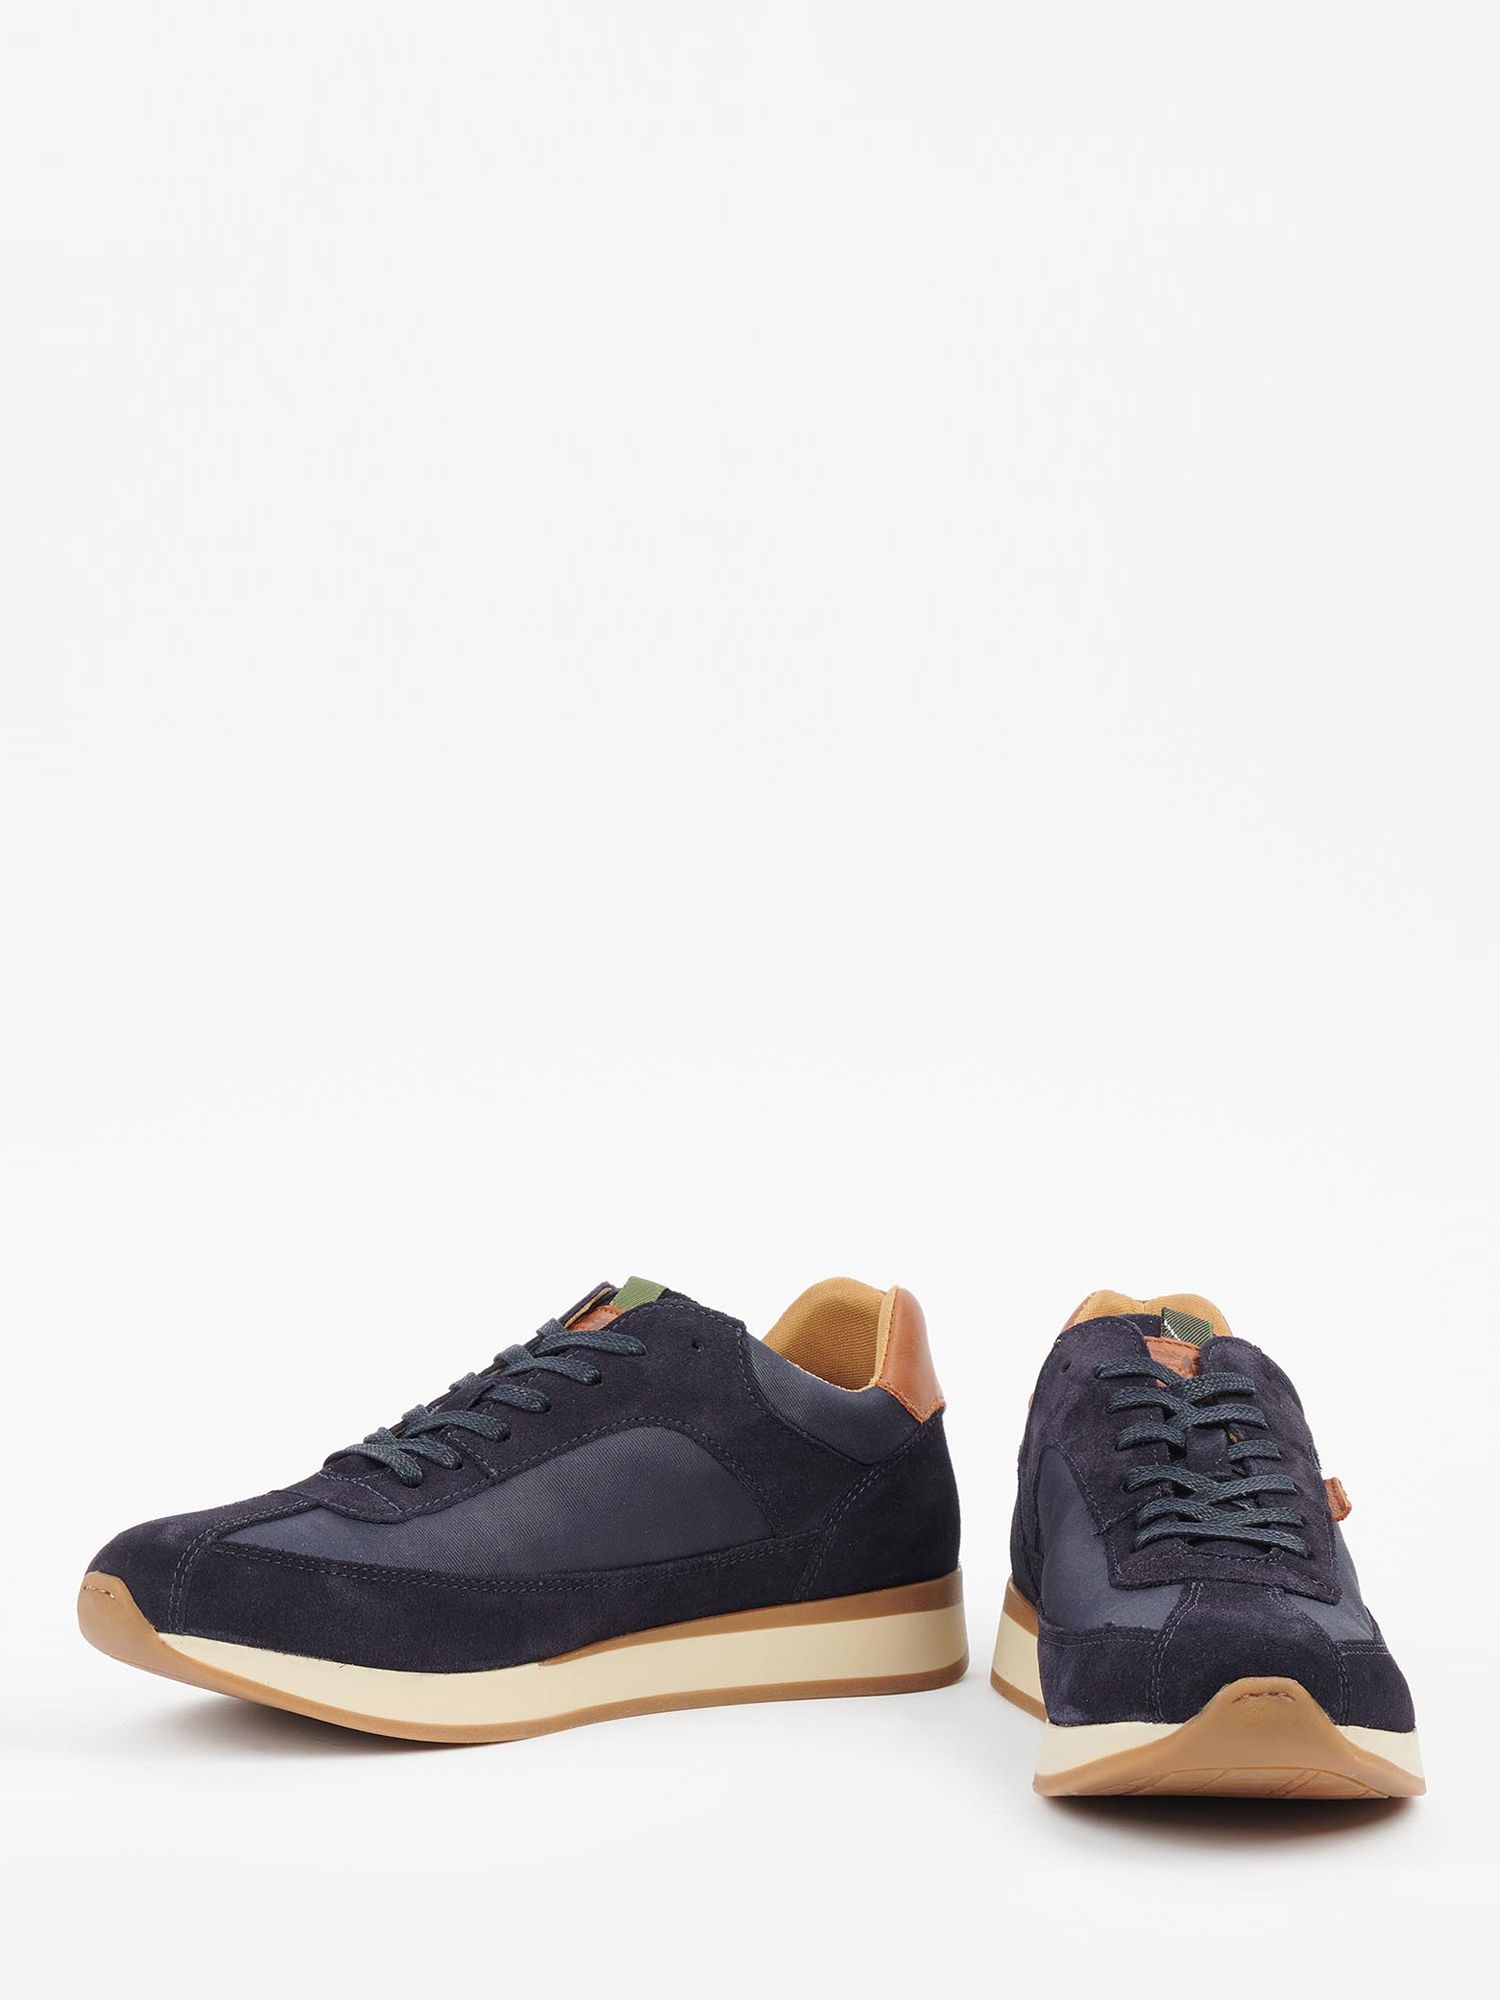 Barbour Isaac Suede Lace Up Trainers, Navy at John Lewis & Partners